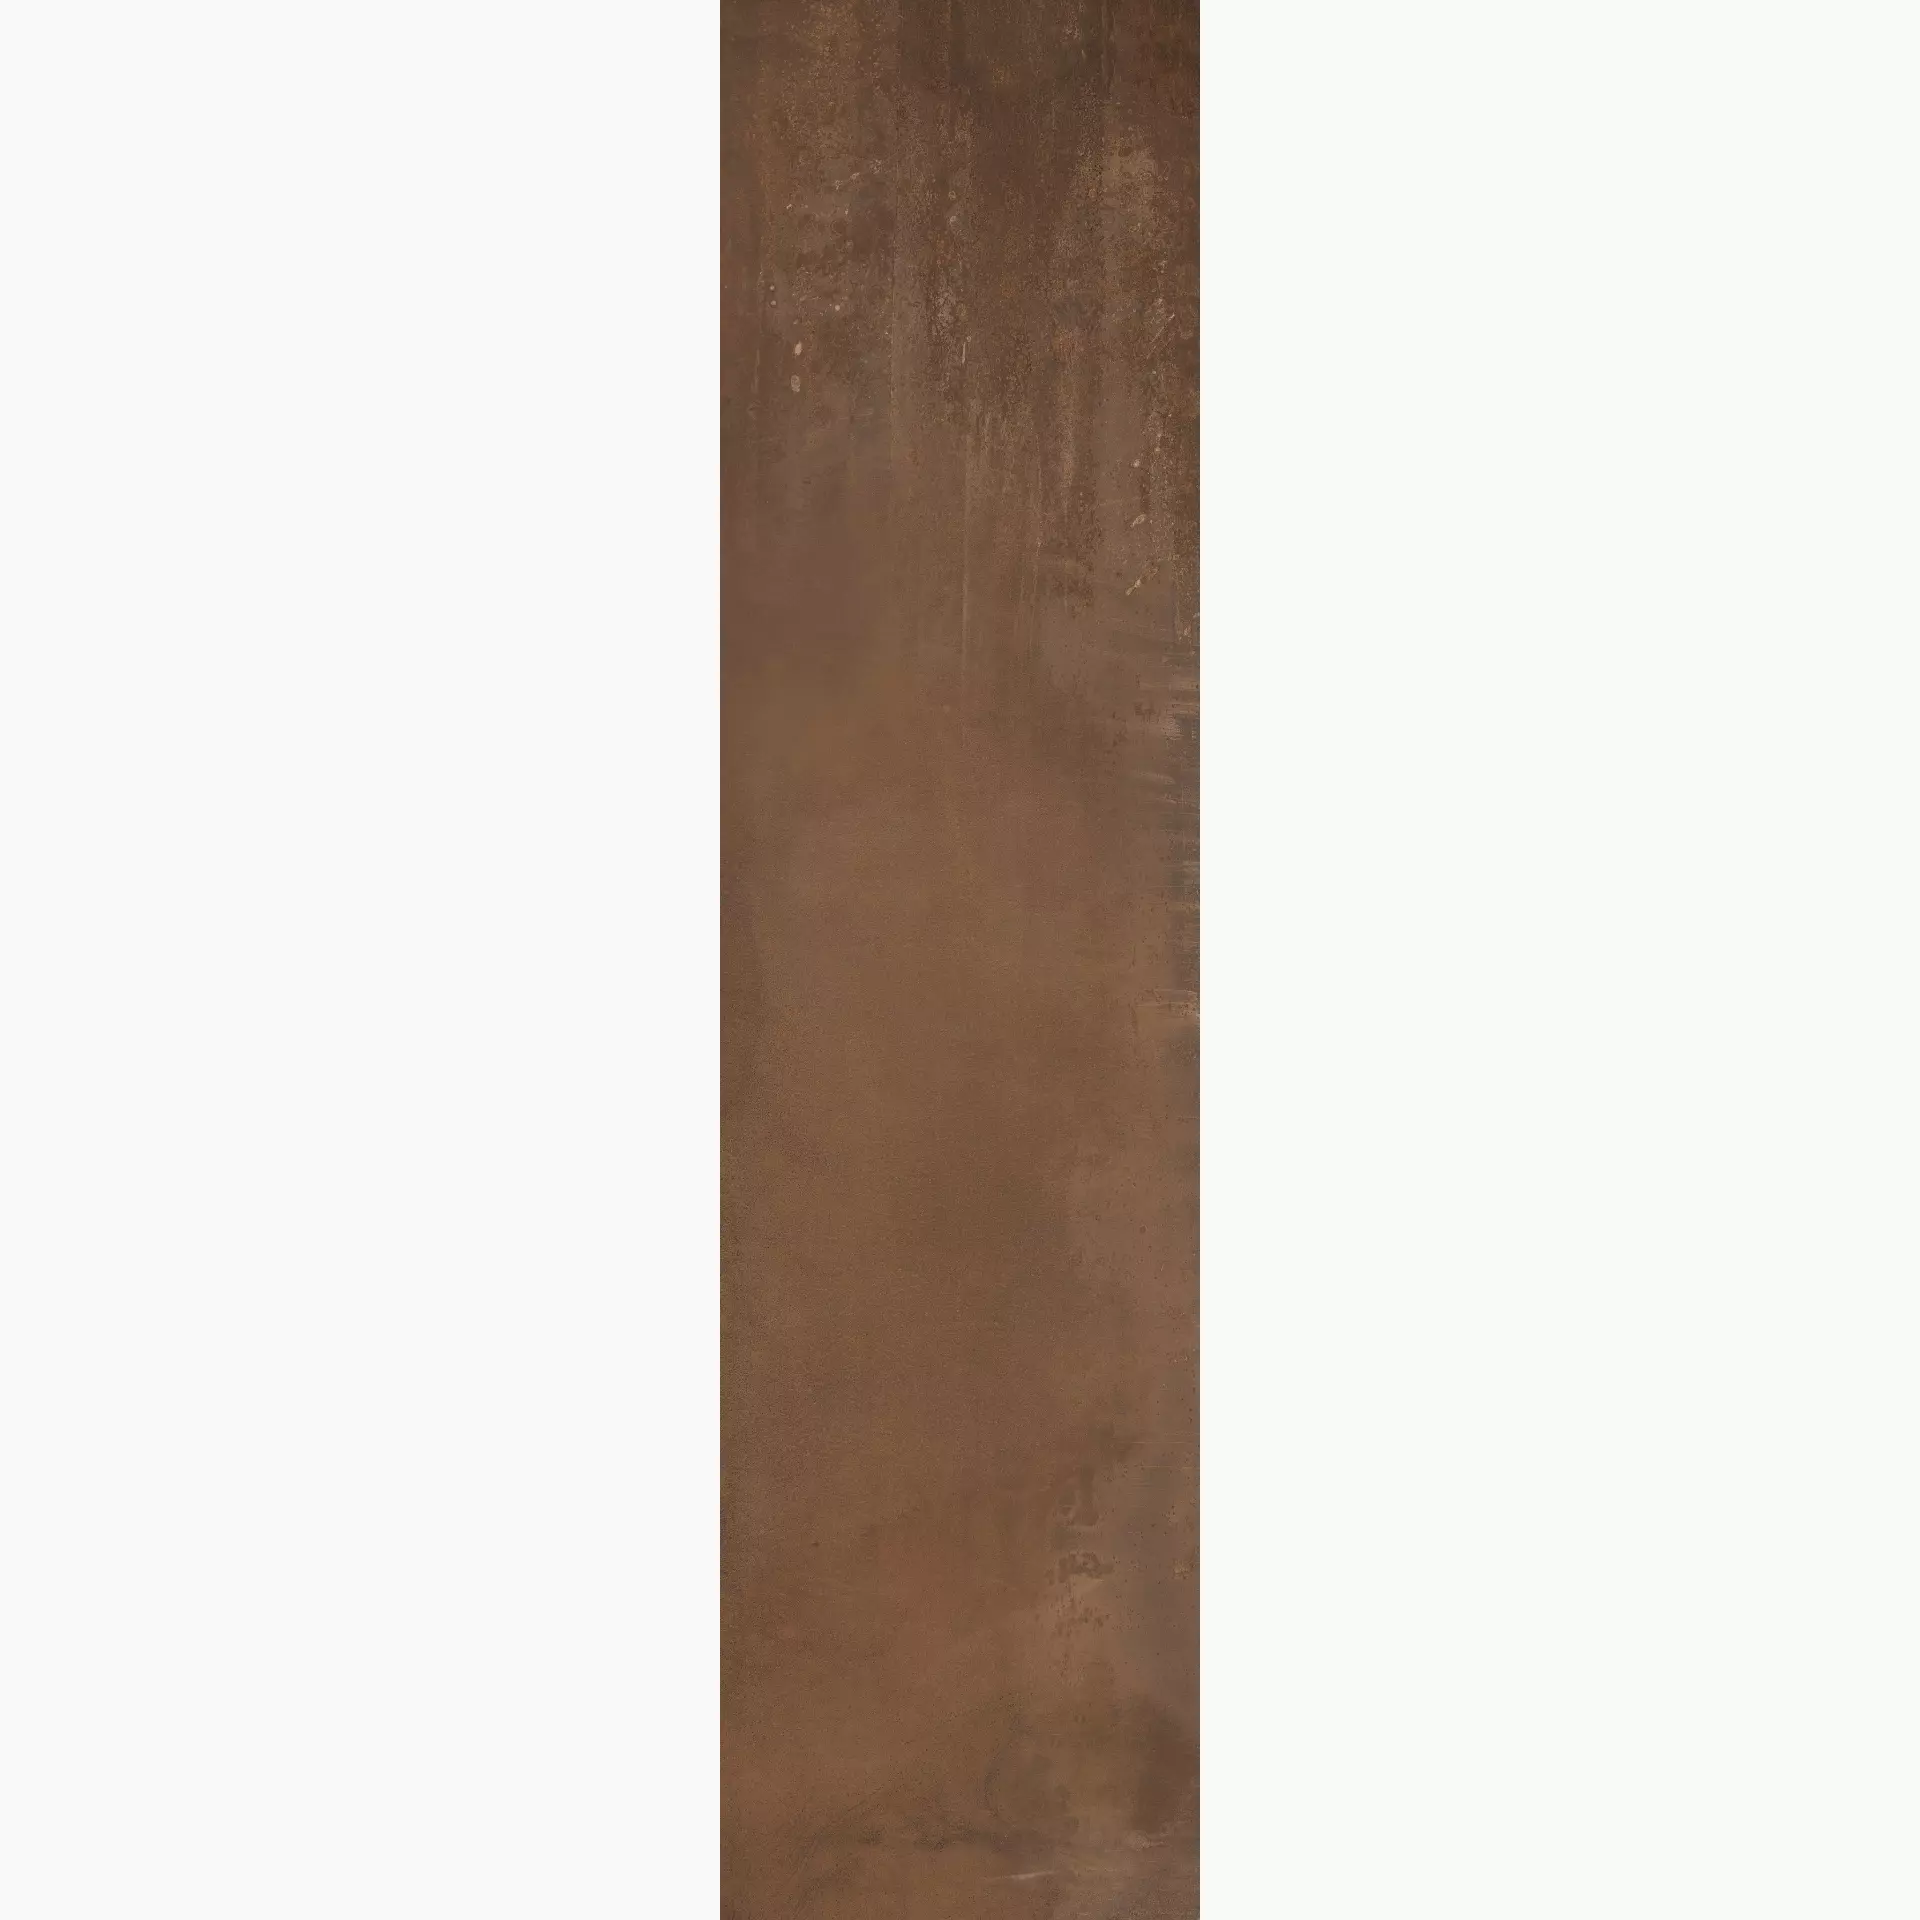 ABK Interno9 Rust Naturale I9R57300 30x120cm rectified 8,5mm